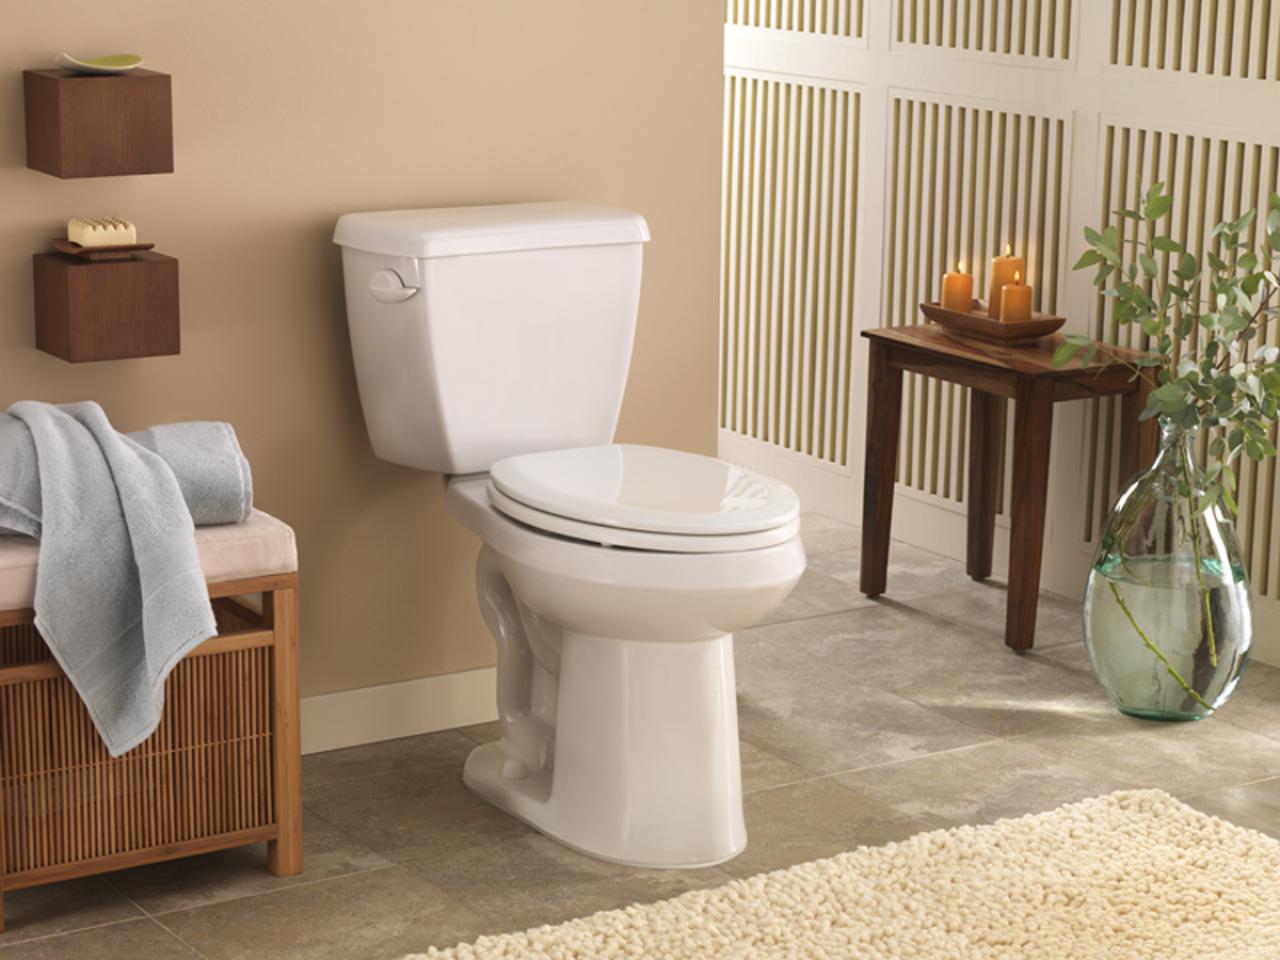 Tips For Buying A Toilet Hgtv,Indian Necklace Designs Images